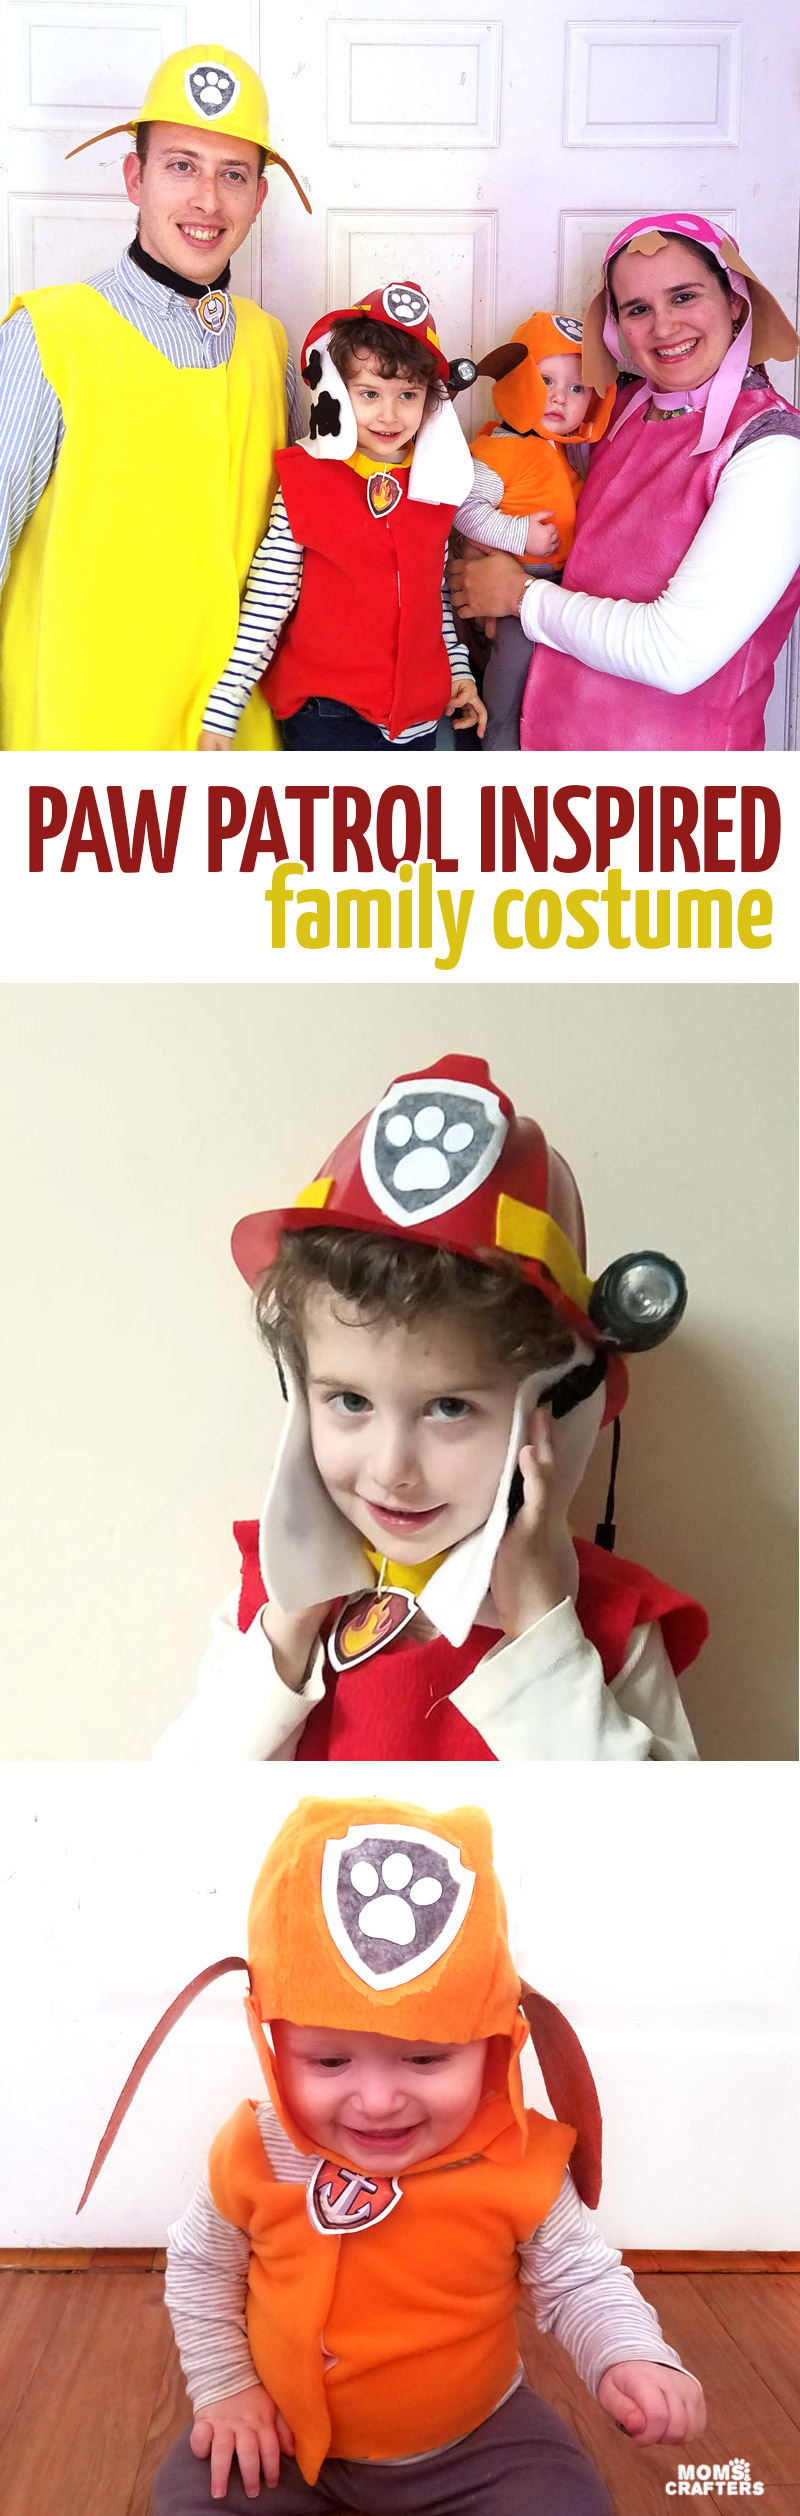 This DIY PAW Patrol family costume idea is so much fun!